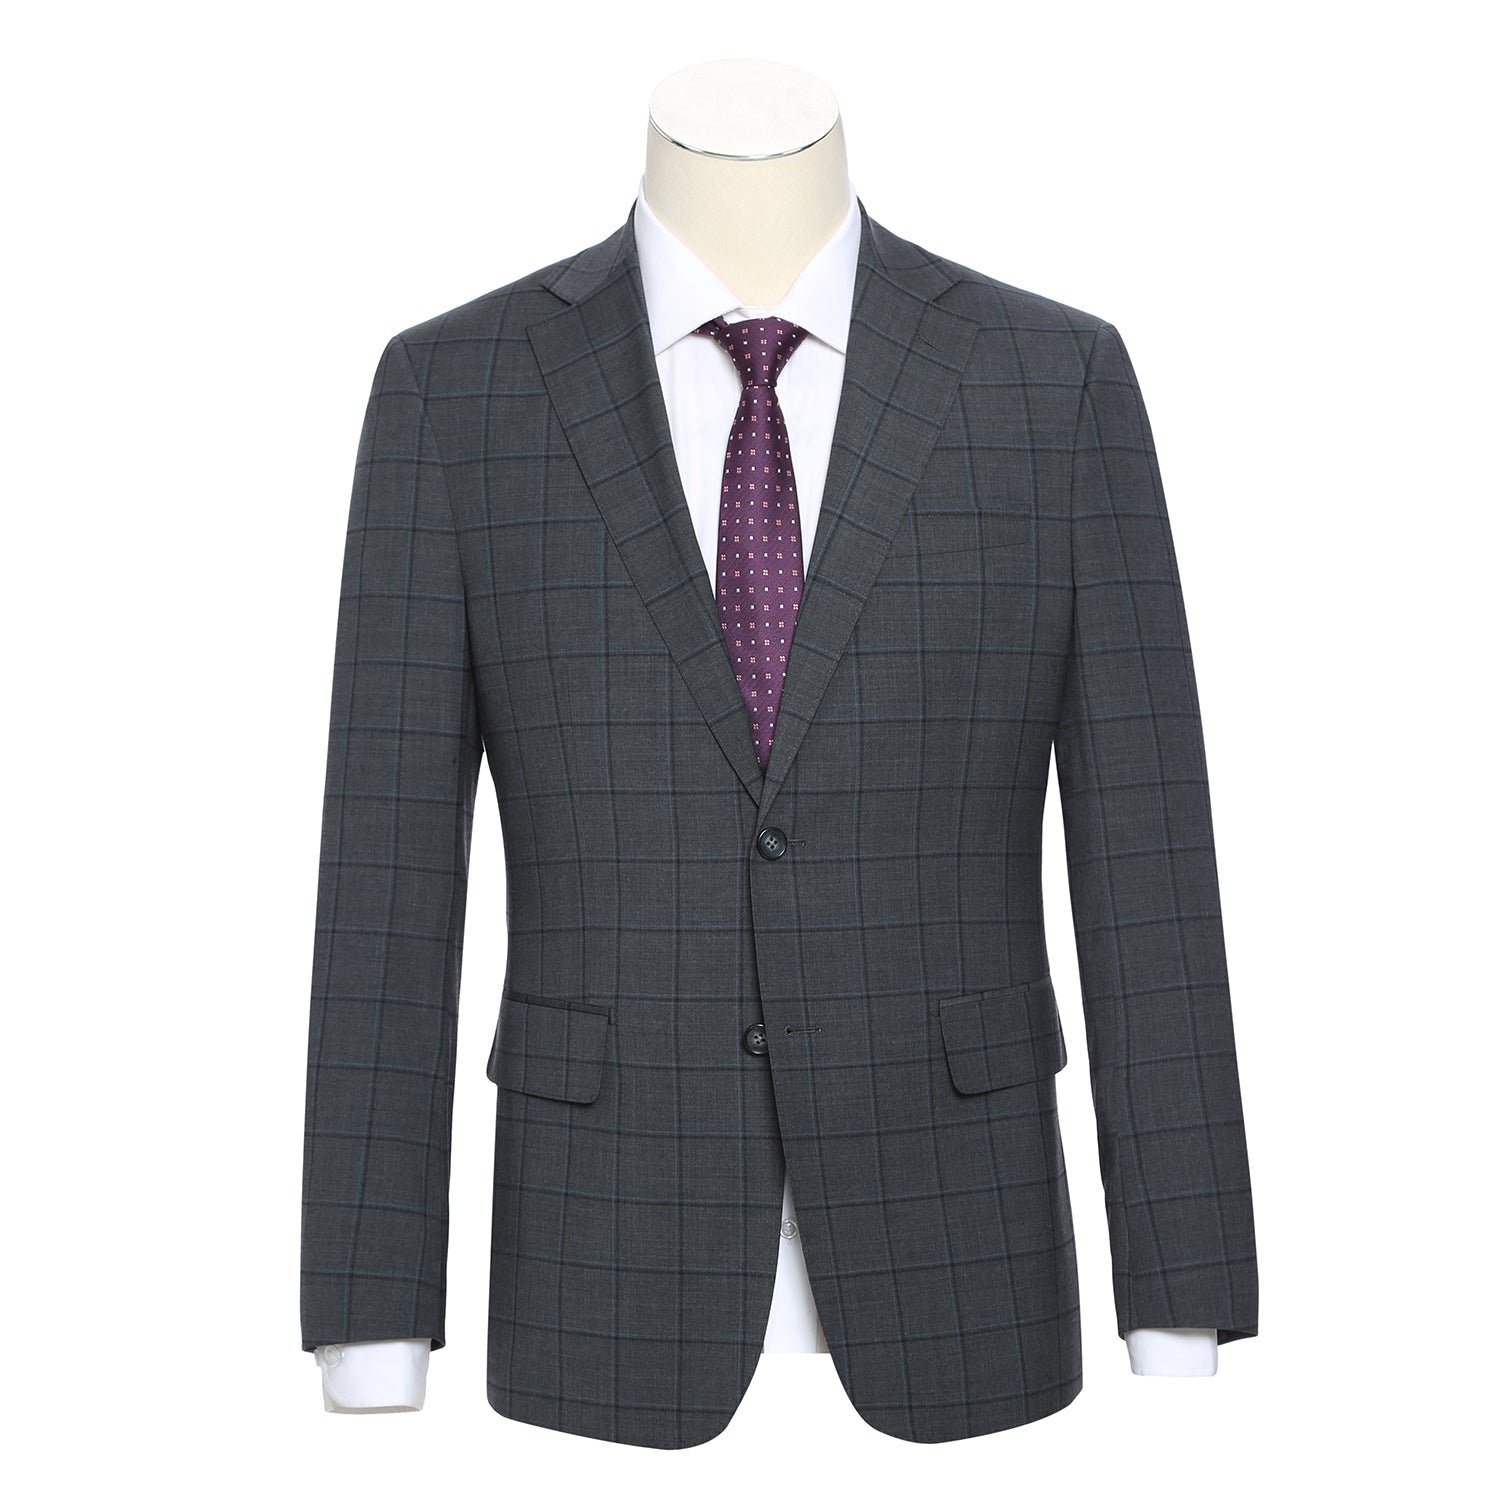 English Laundry Charcoal Checked Wool Suit